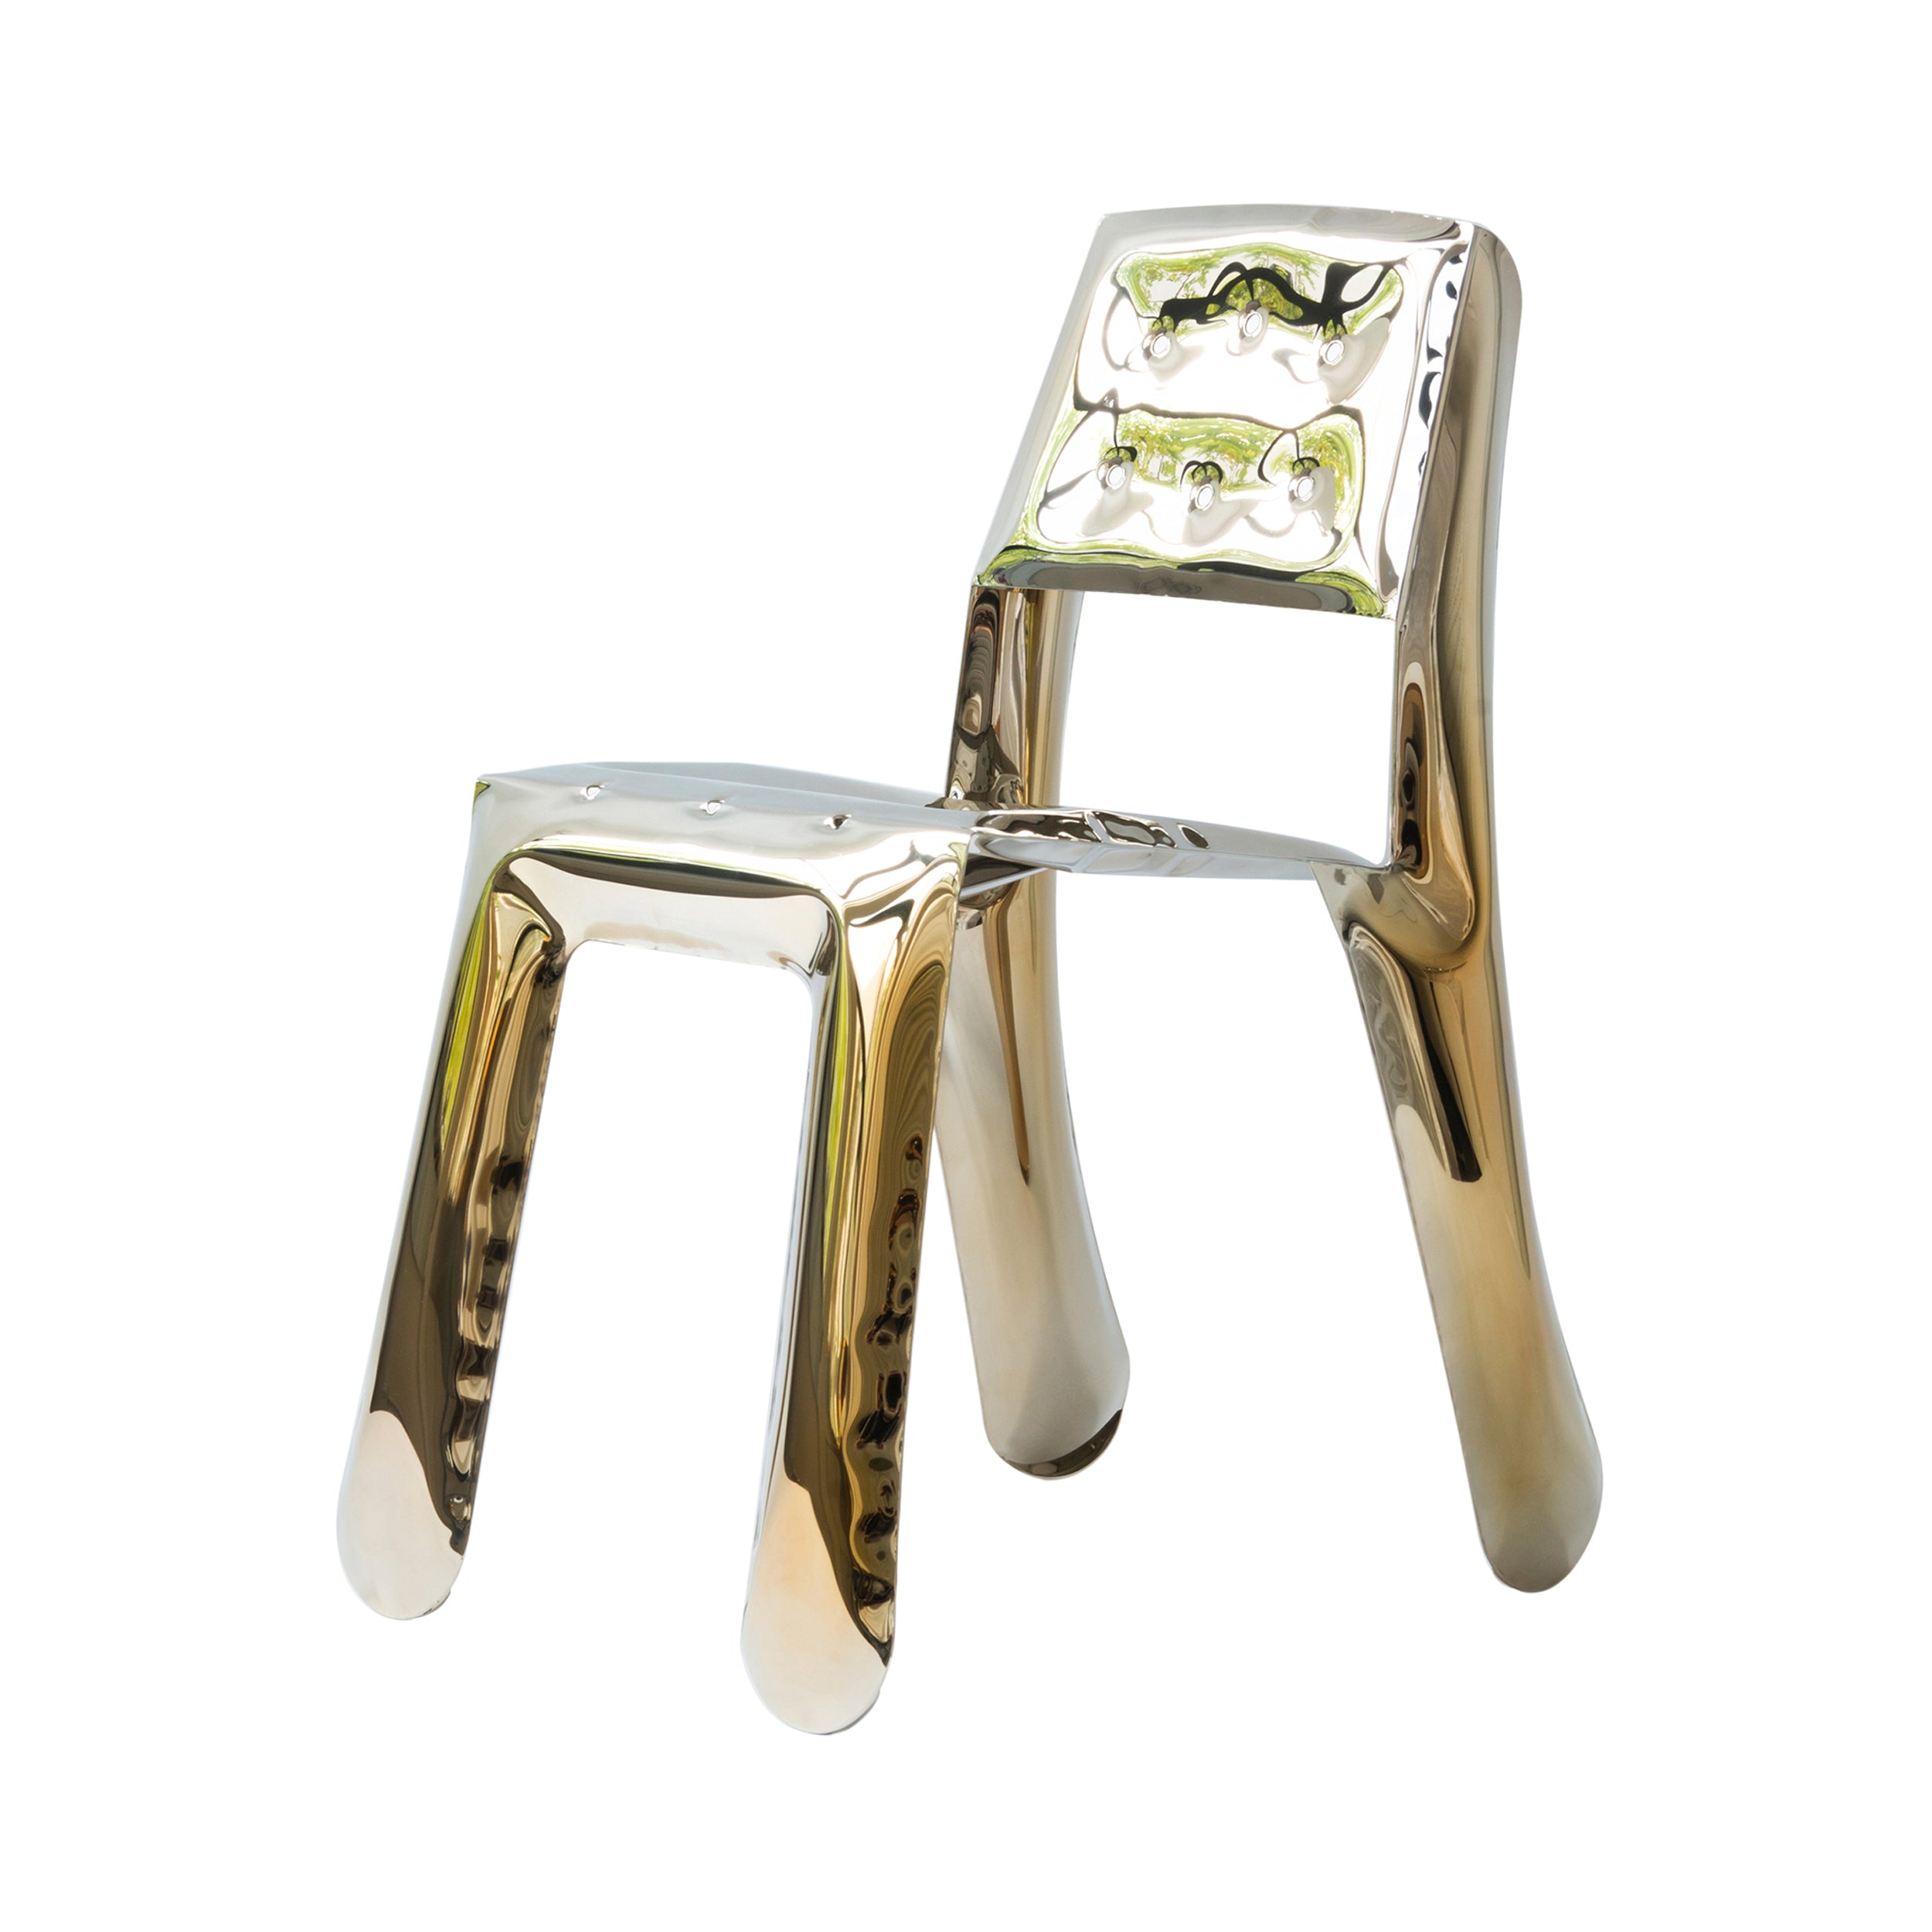 Chippensteel 0.5 Chair: Flamed Gold Carbon Steel